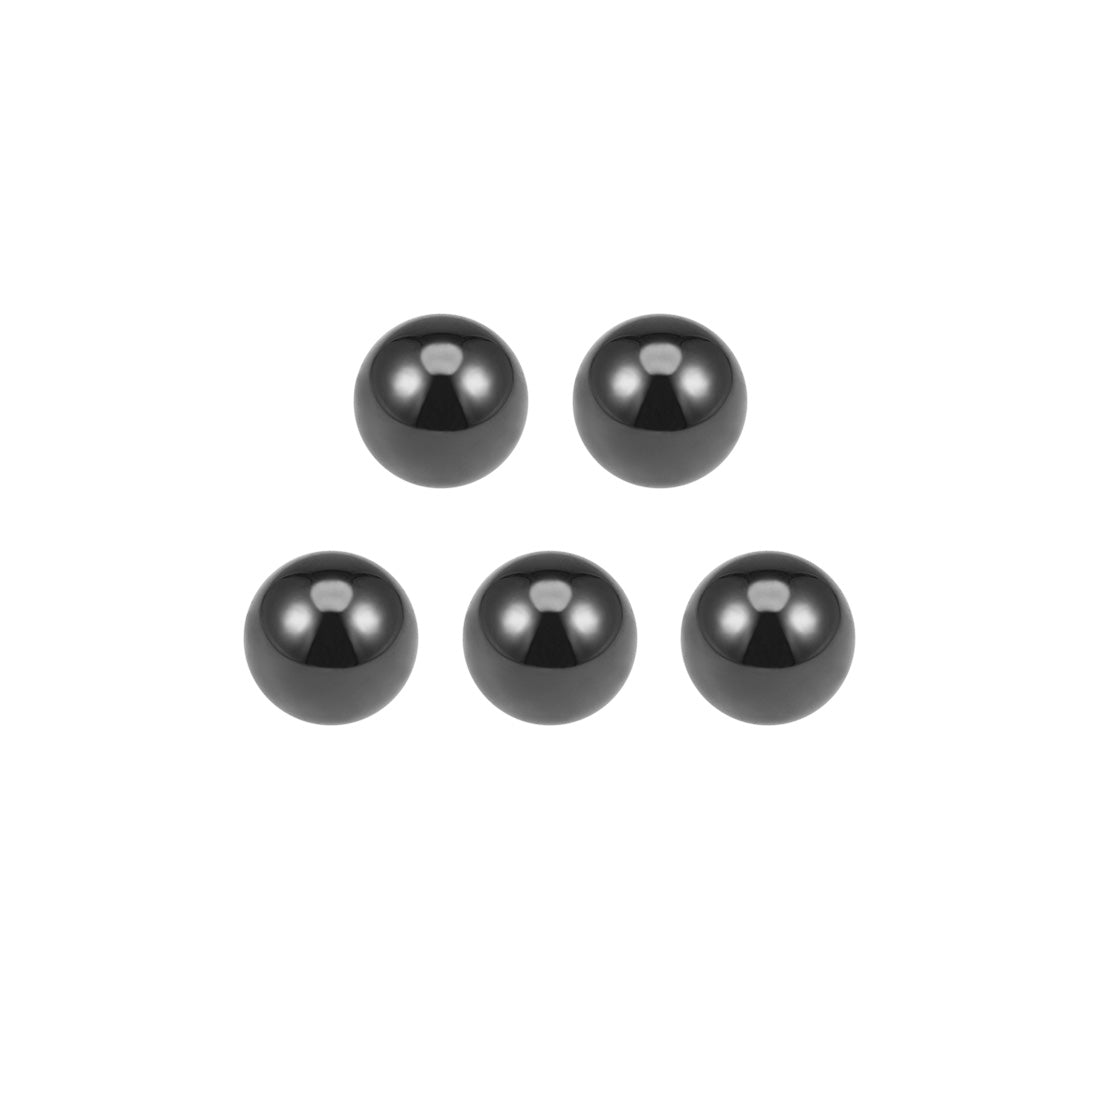 Uxcell Uxcell 4mm Ceramic Bearing Balls, Si3N4 Silicon Nitride Ball G5 Precision 5pcs